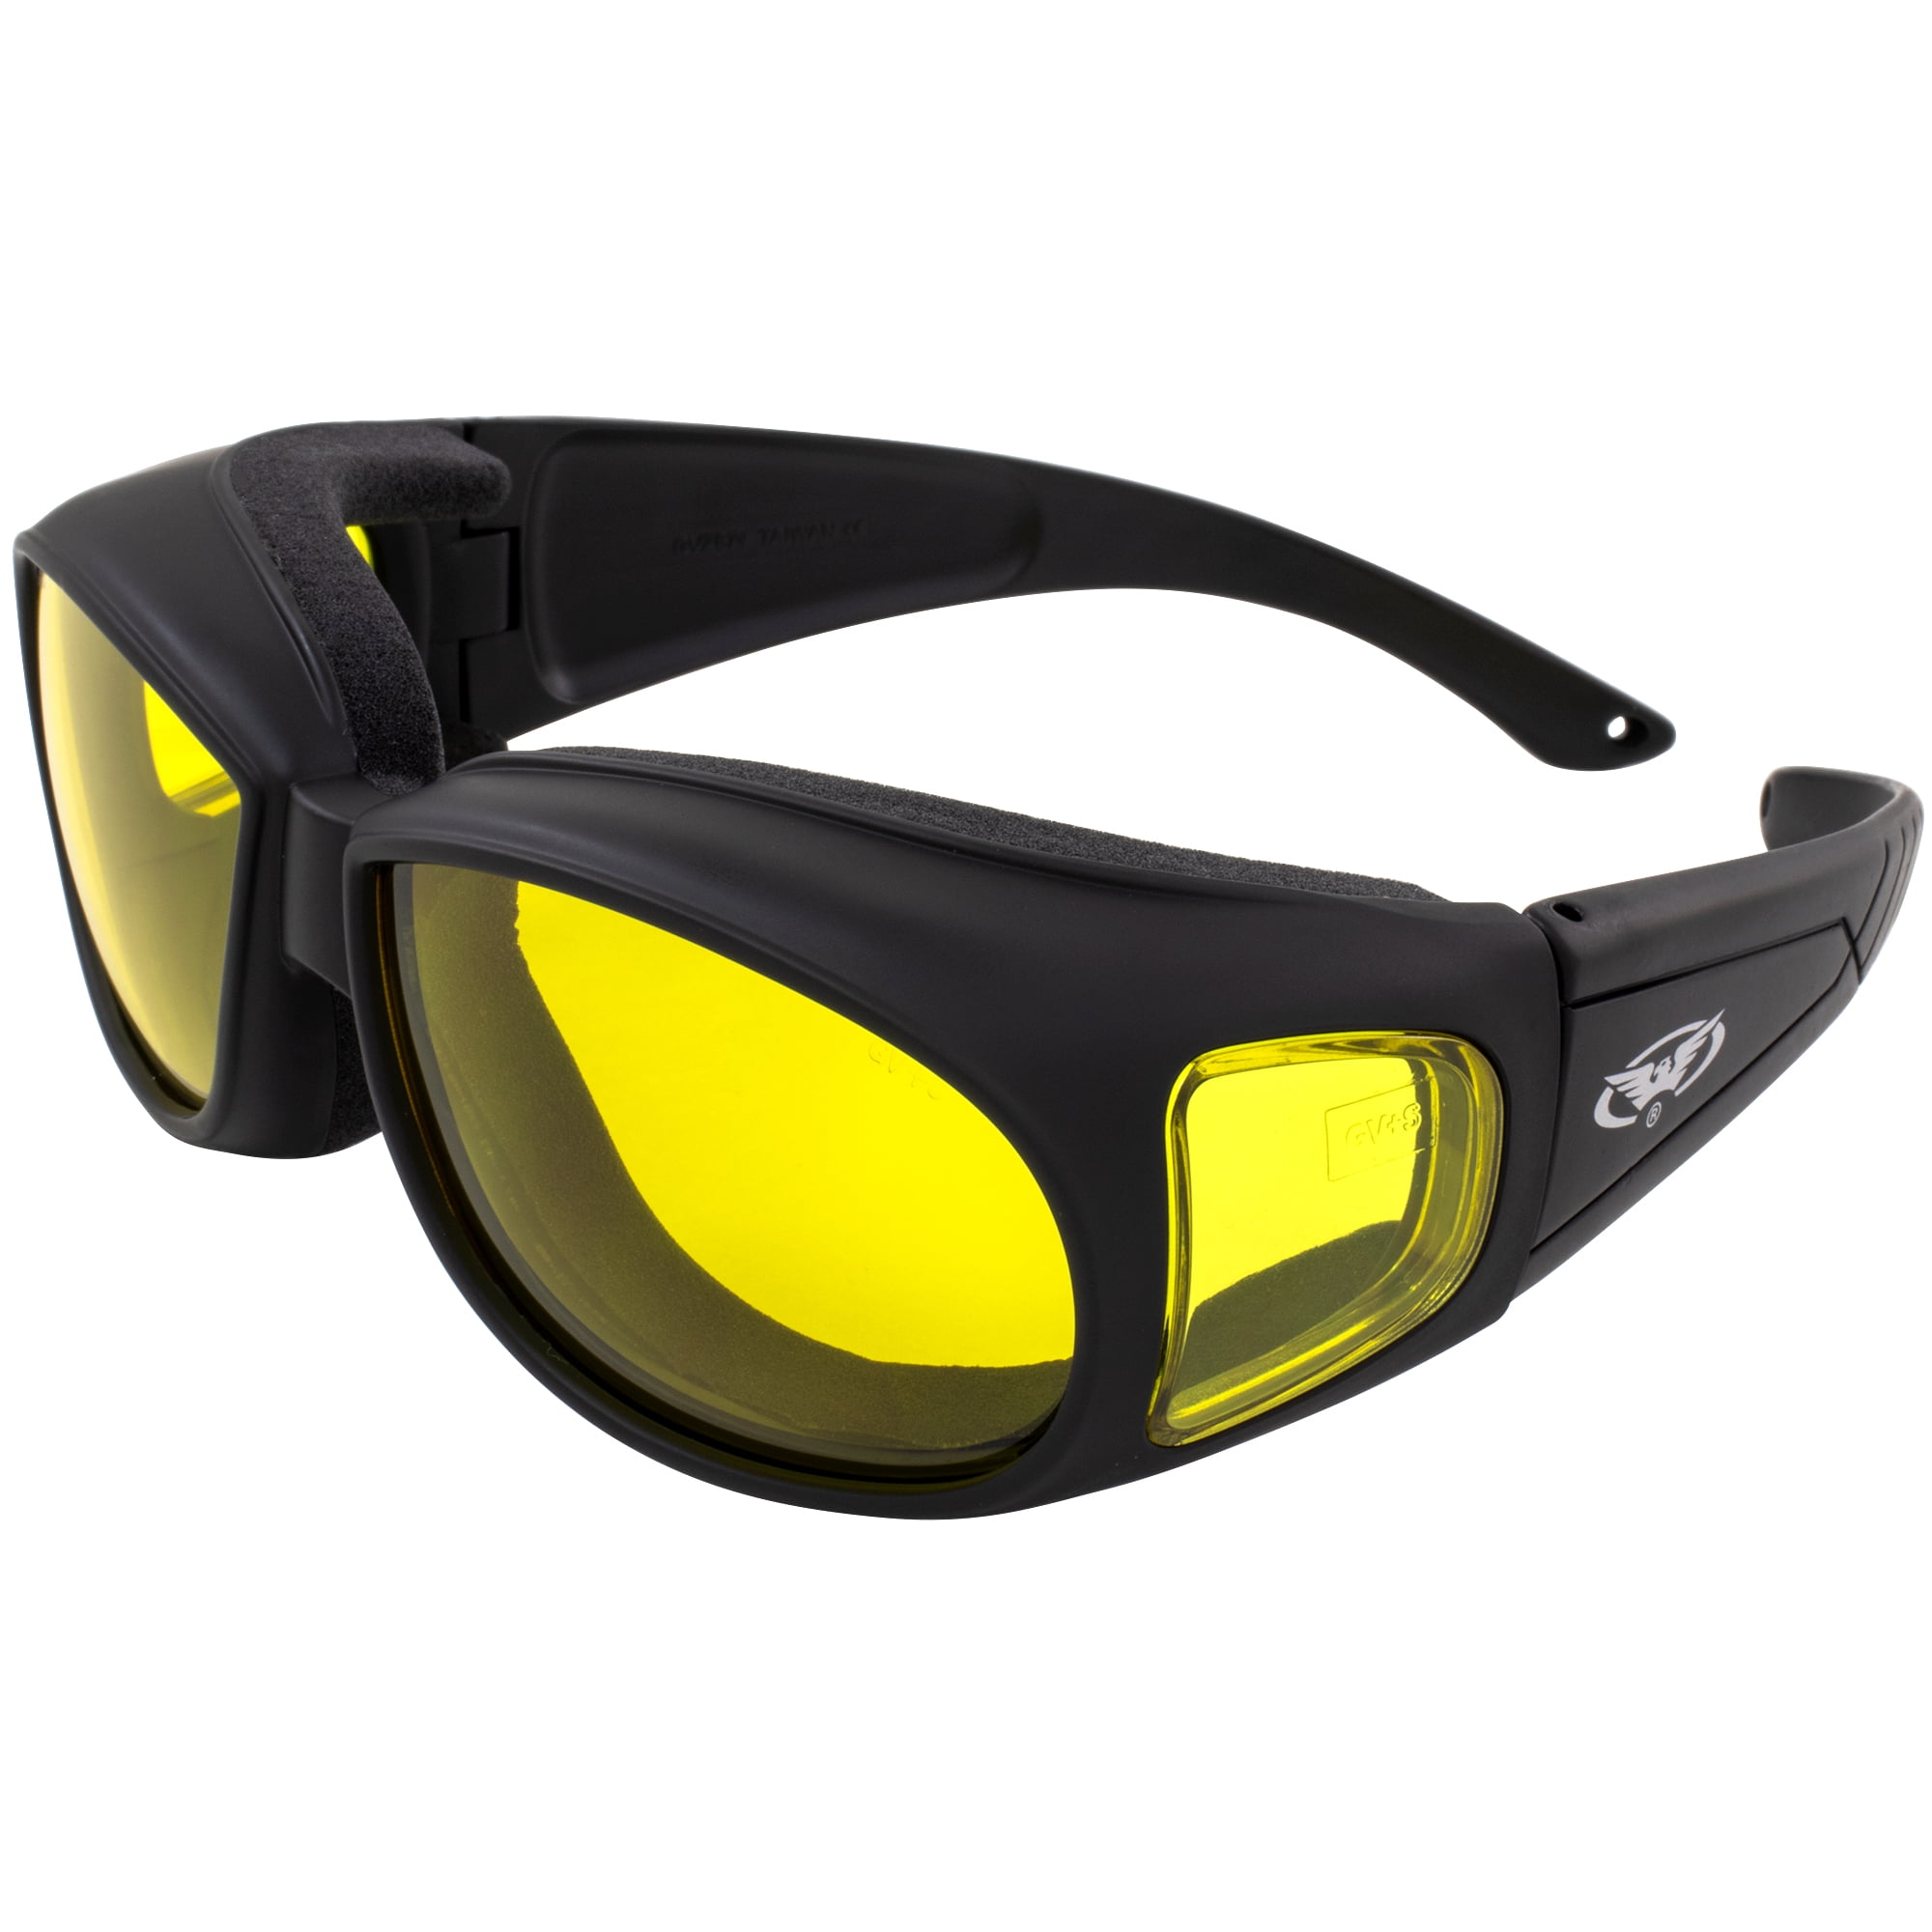 Maxx Safety Glasses Series black yellow lens ANSI Z87 CERTIFIED SS3 motorcycle 